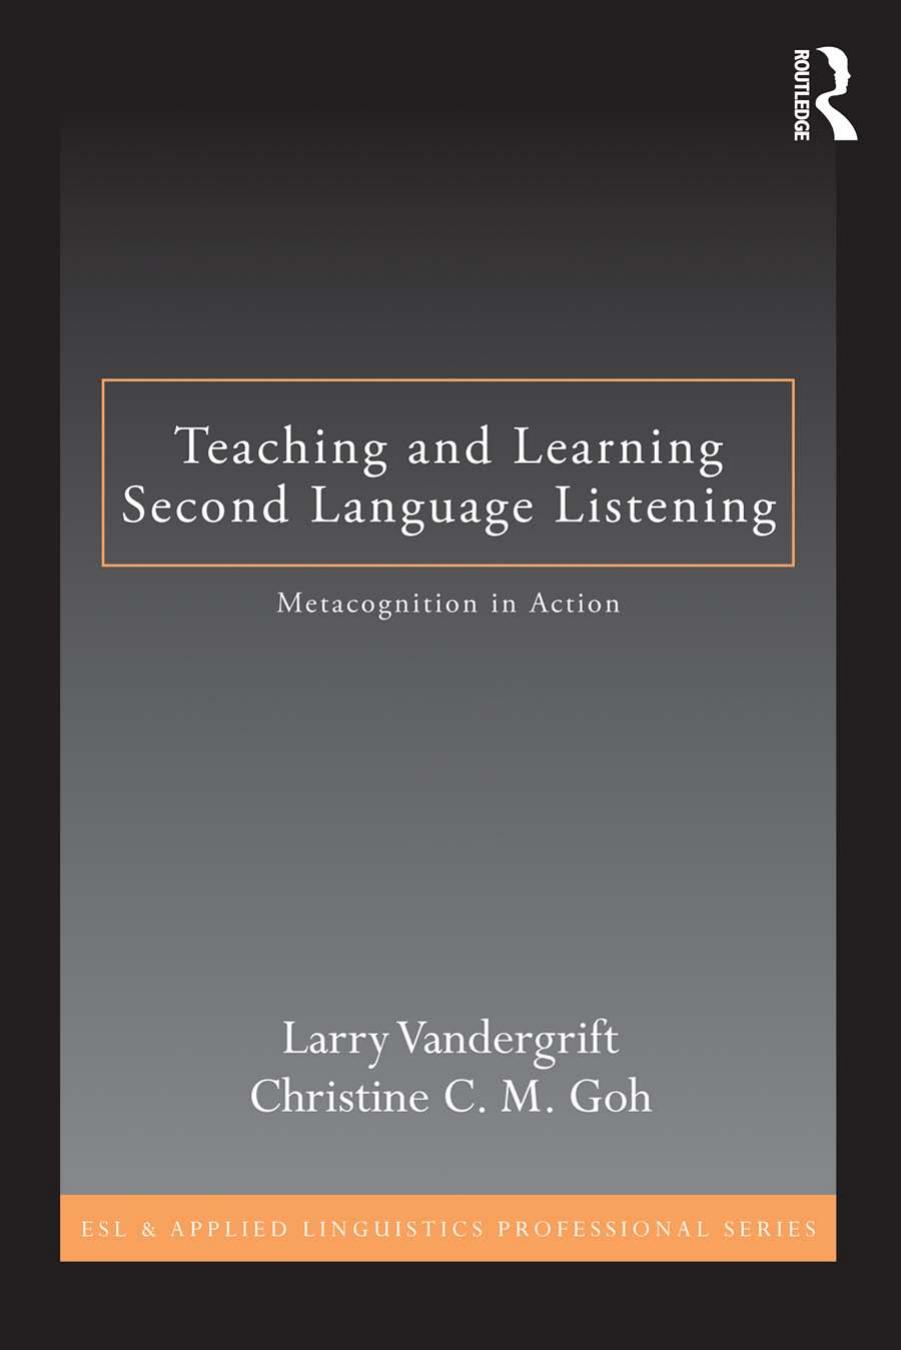 Teaching and Learning Second Language Listening: Metacognition in Action